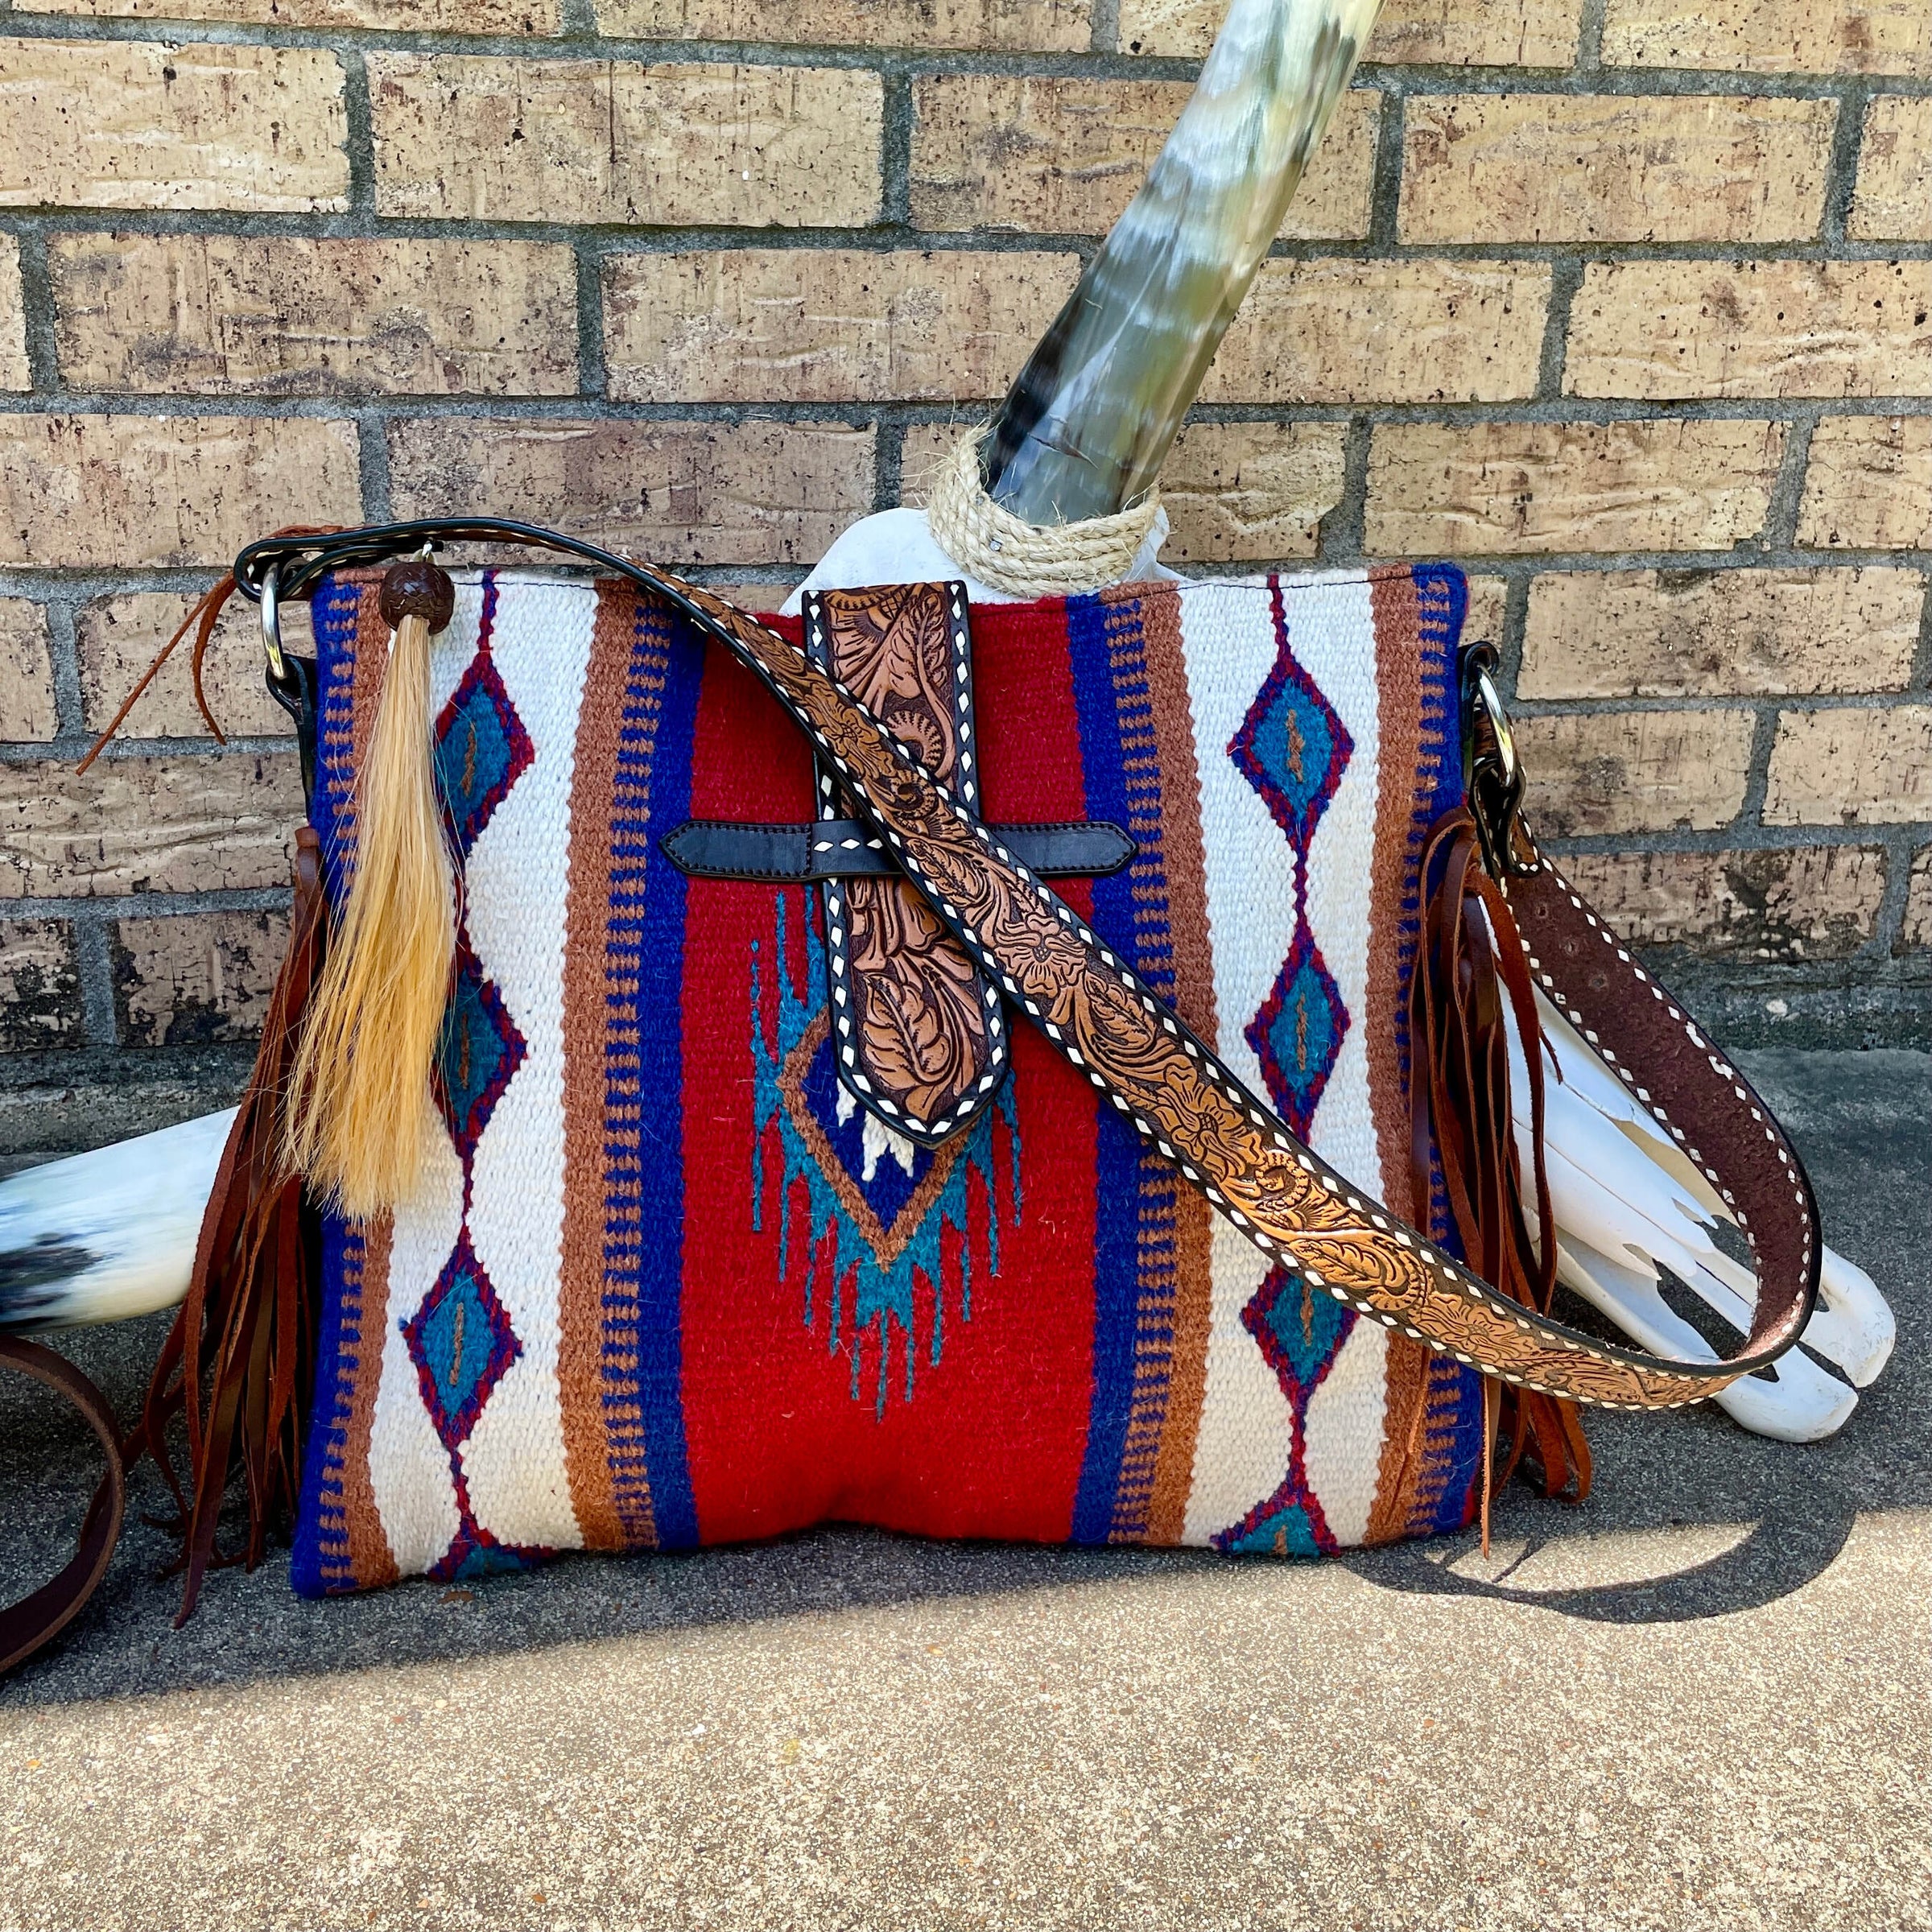 Luggage  The Spirit of the West mixed with a little Boho Gypsy!